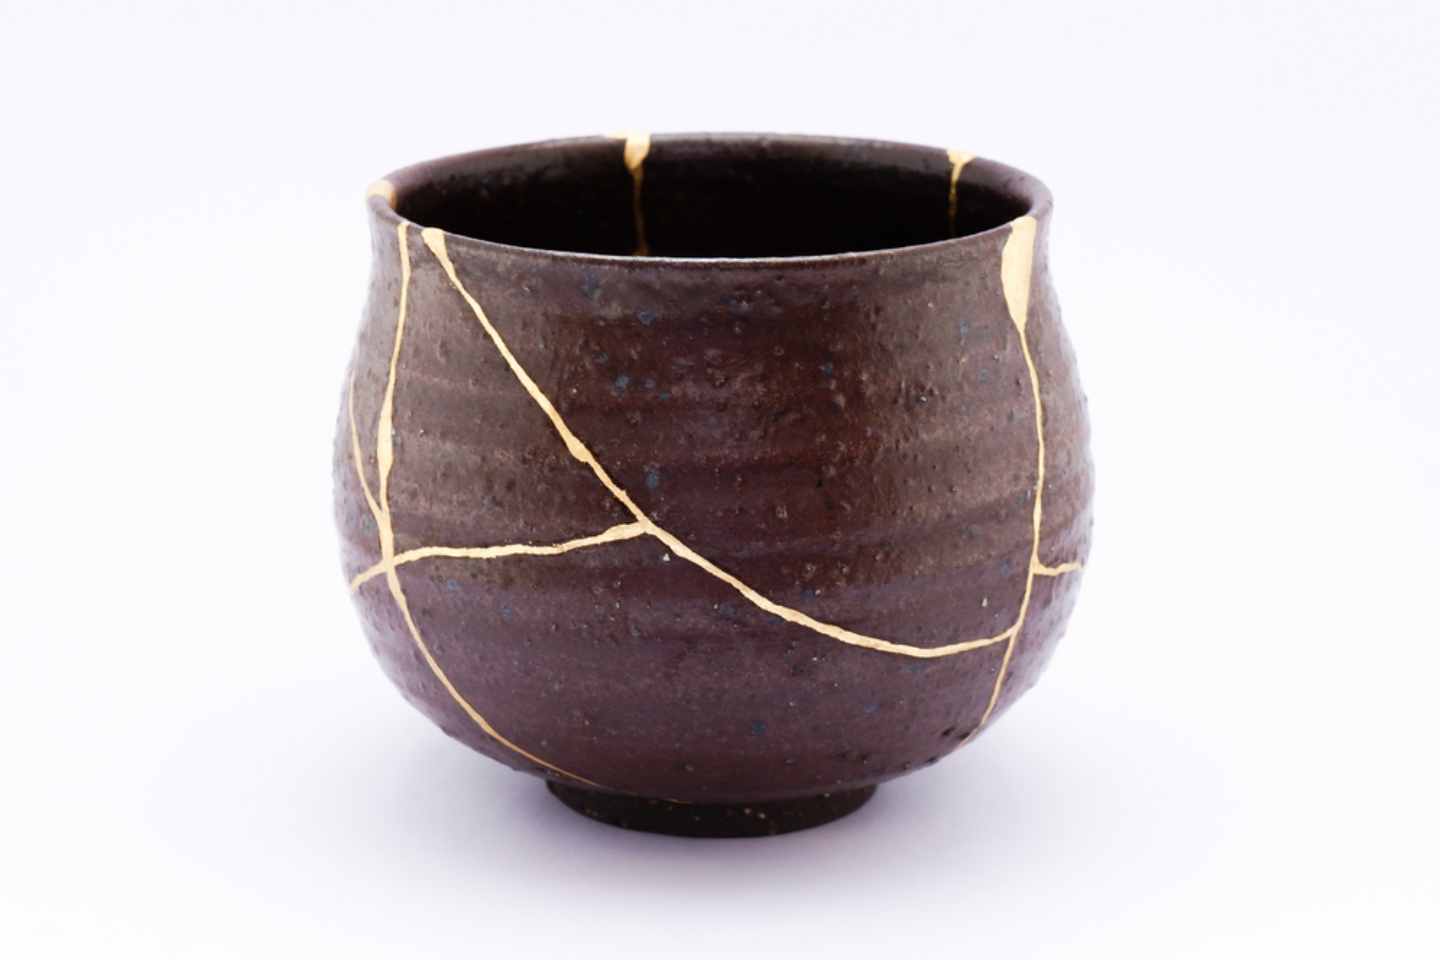 Kintsugi: The Beauty of Imperfection